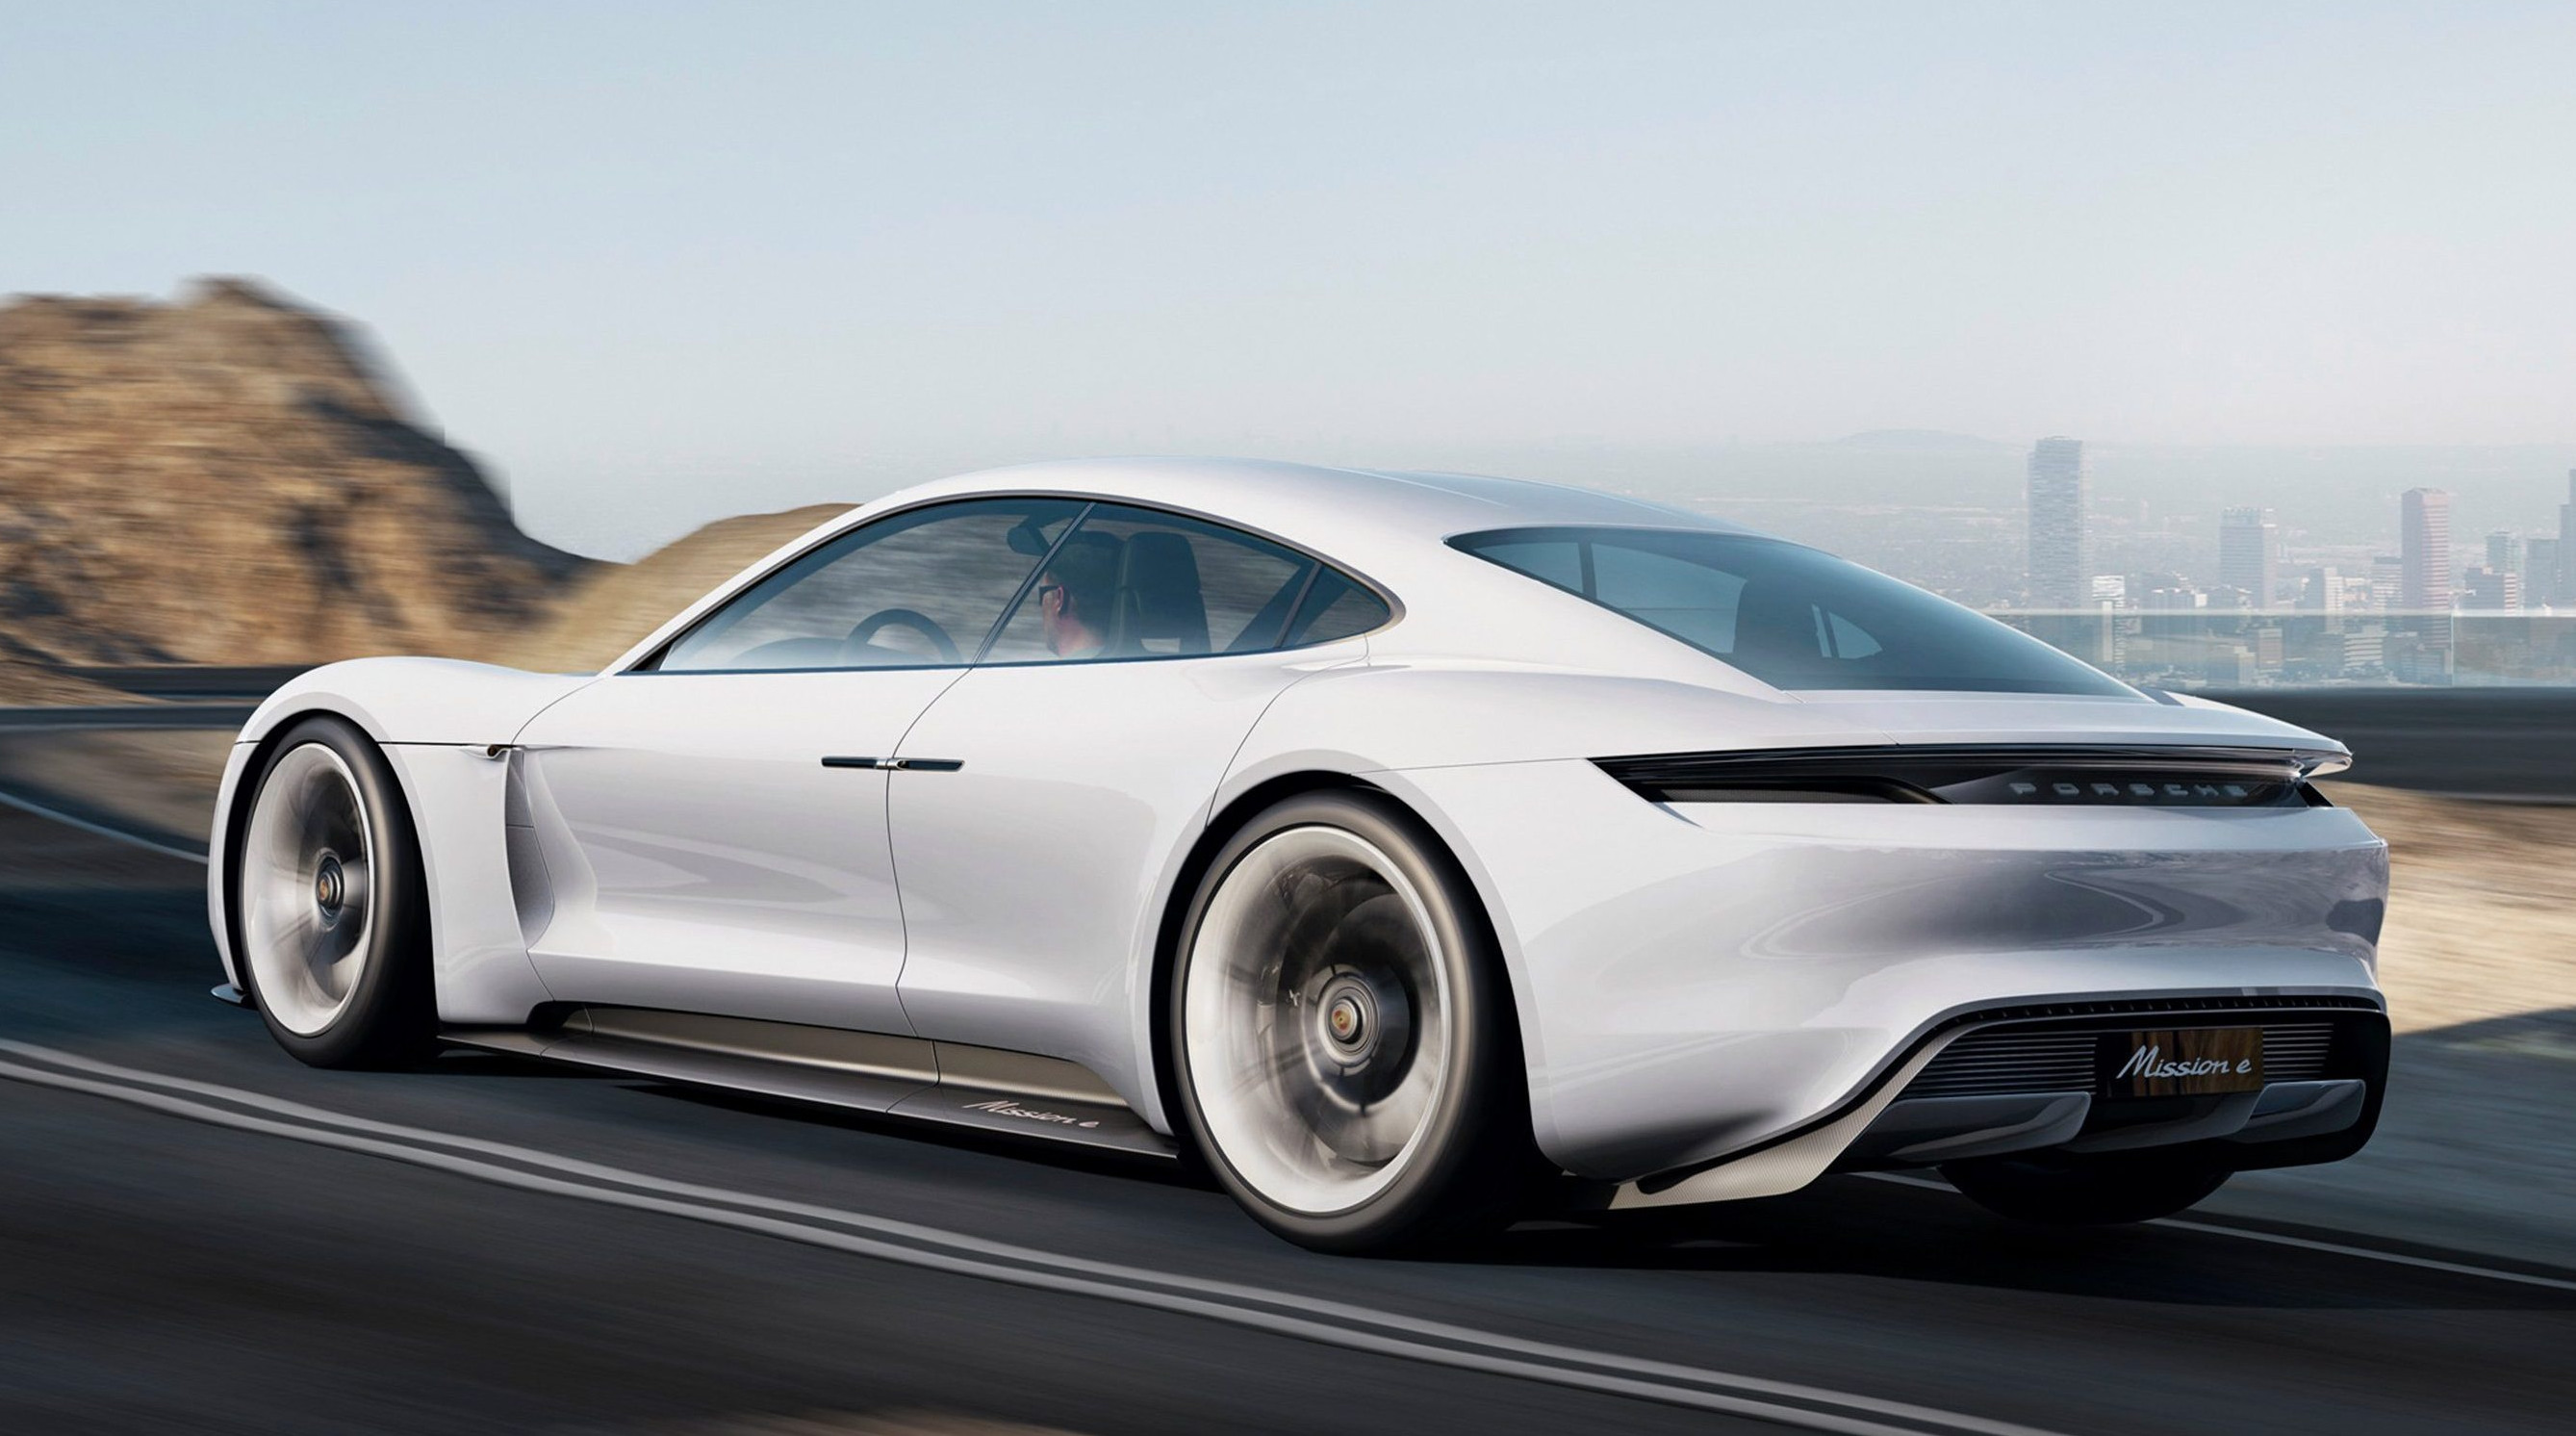 More than 20,000 prospective buyers for Porsche Taycan | Electric Hunter